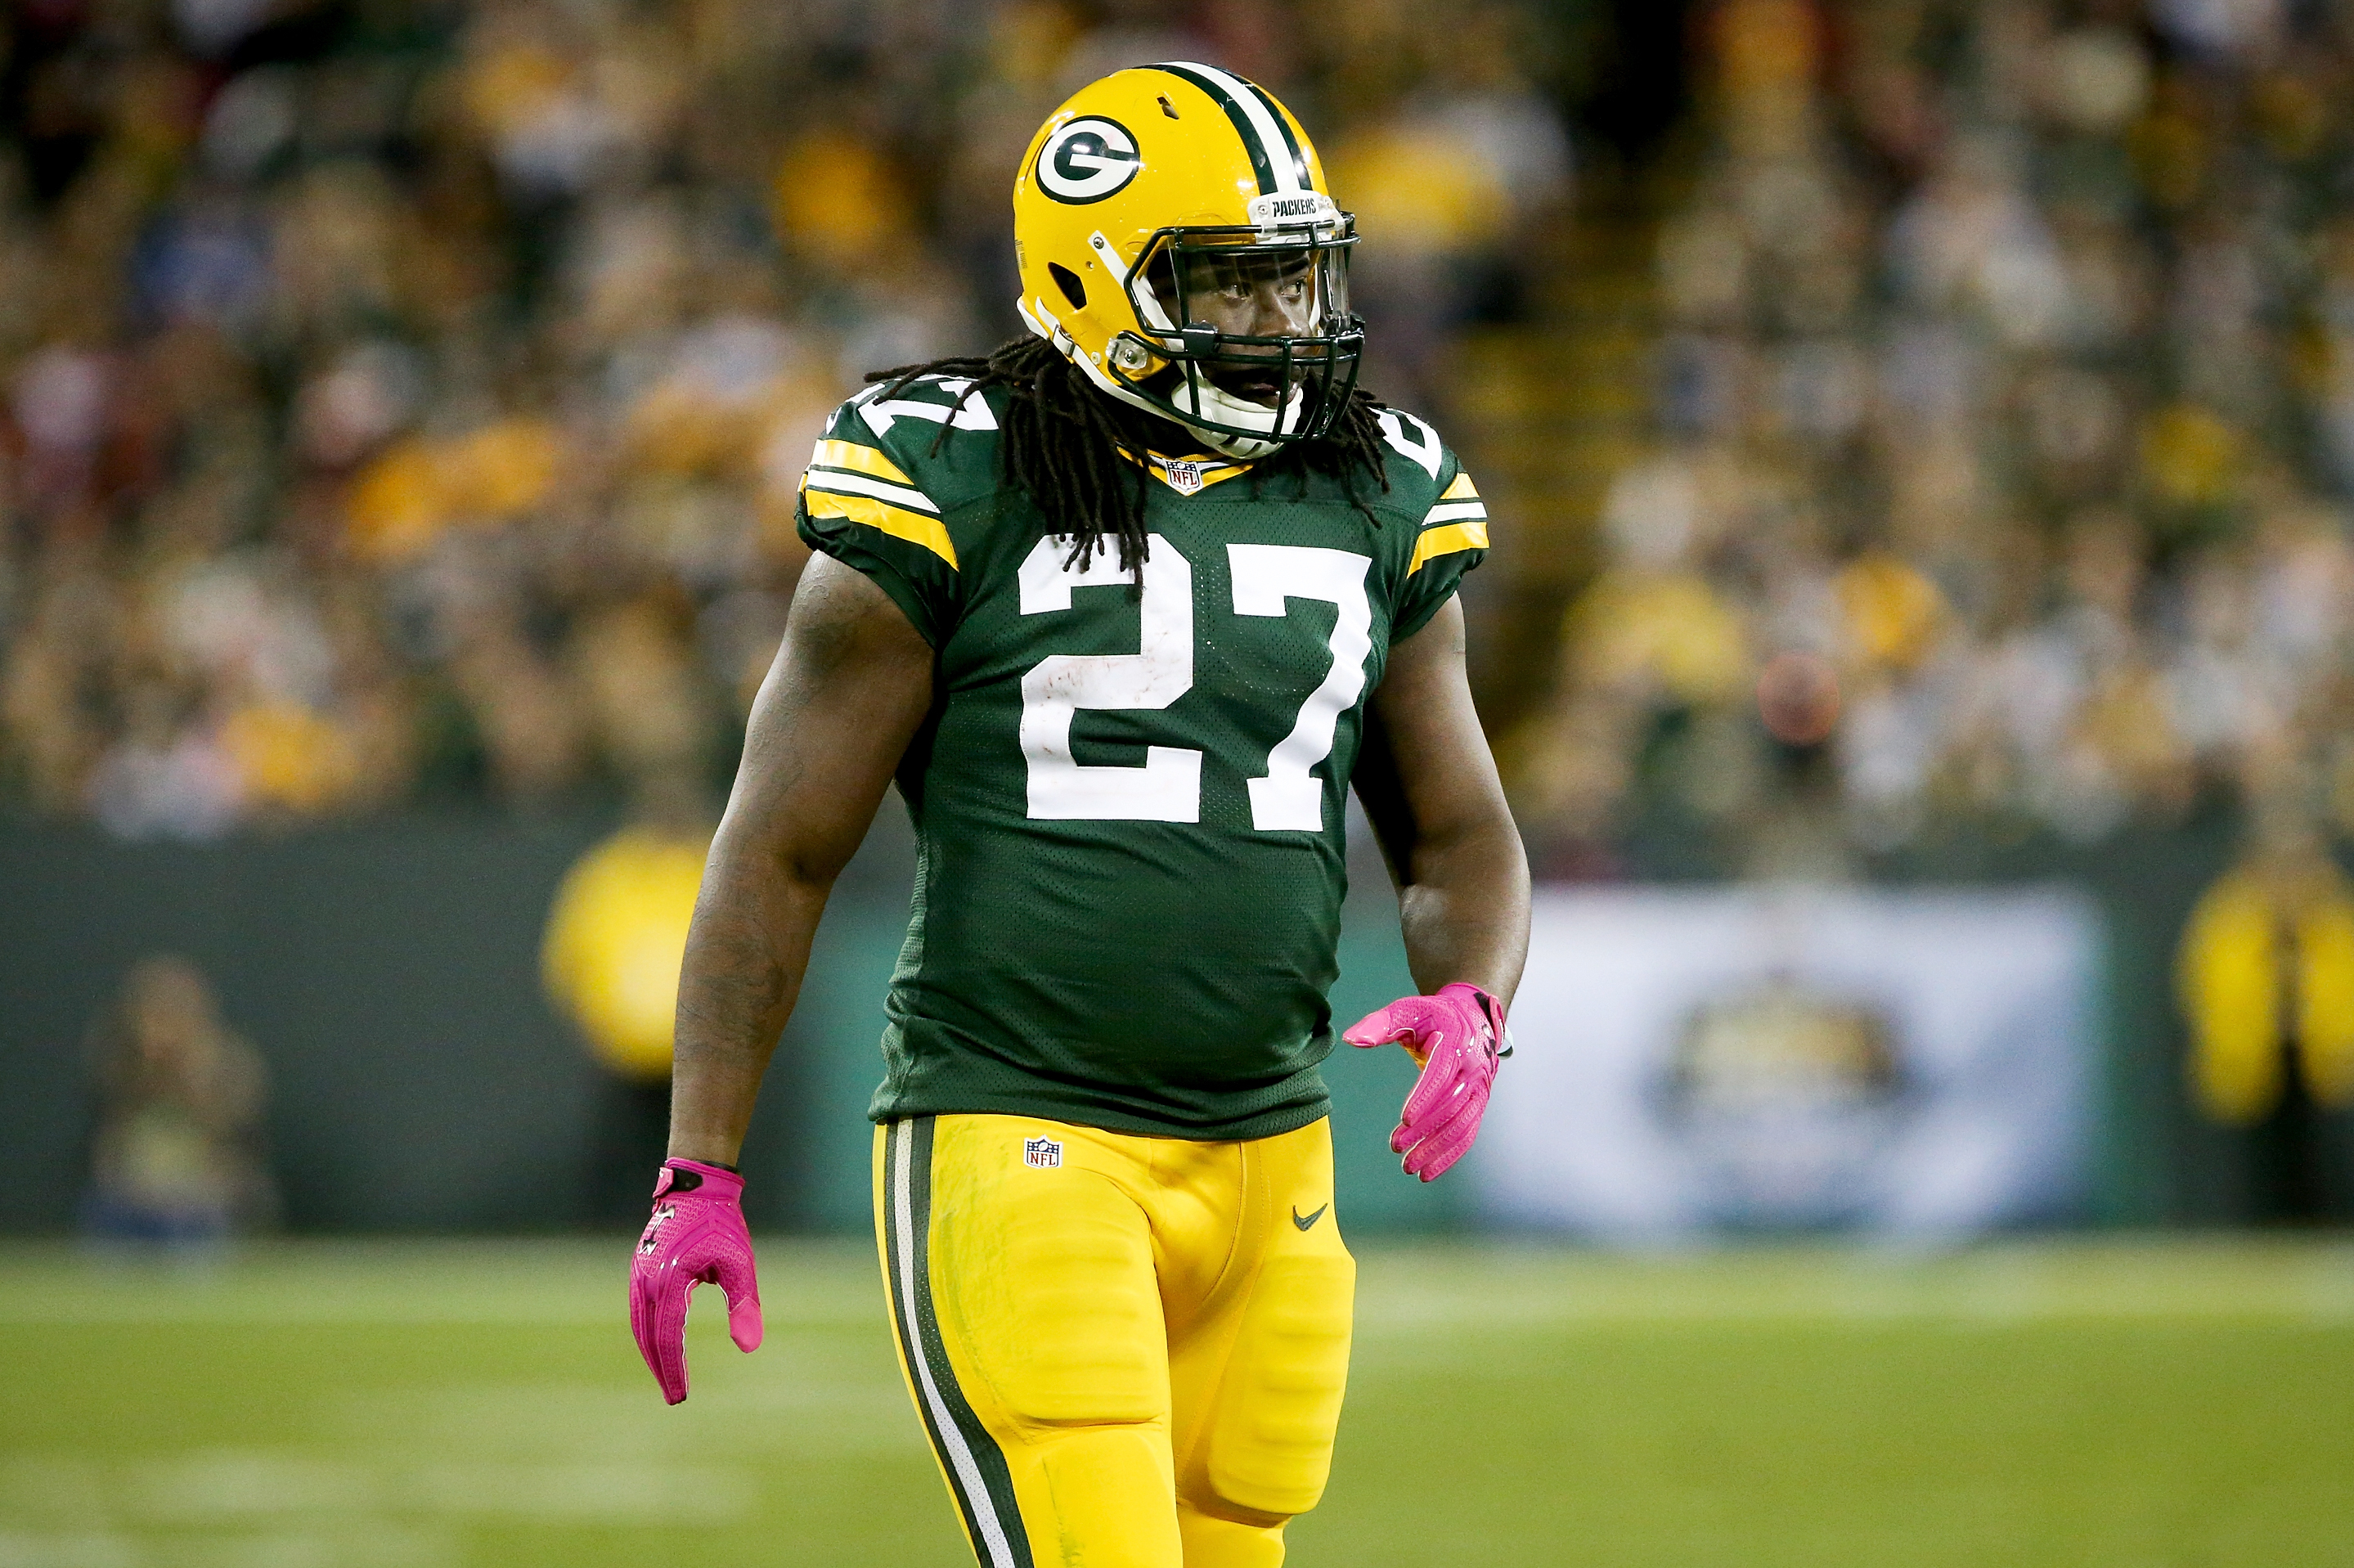 Fan photo: Presenting the slimmed-down Eddie Lacy